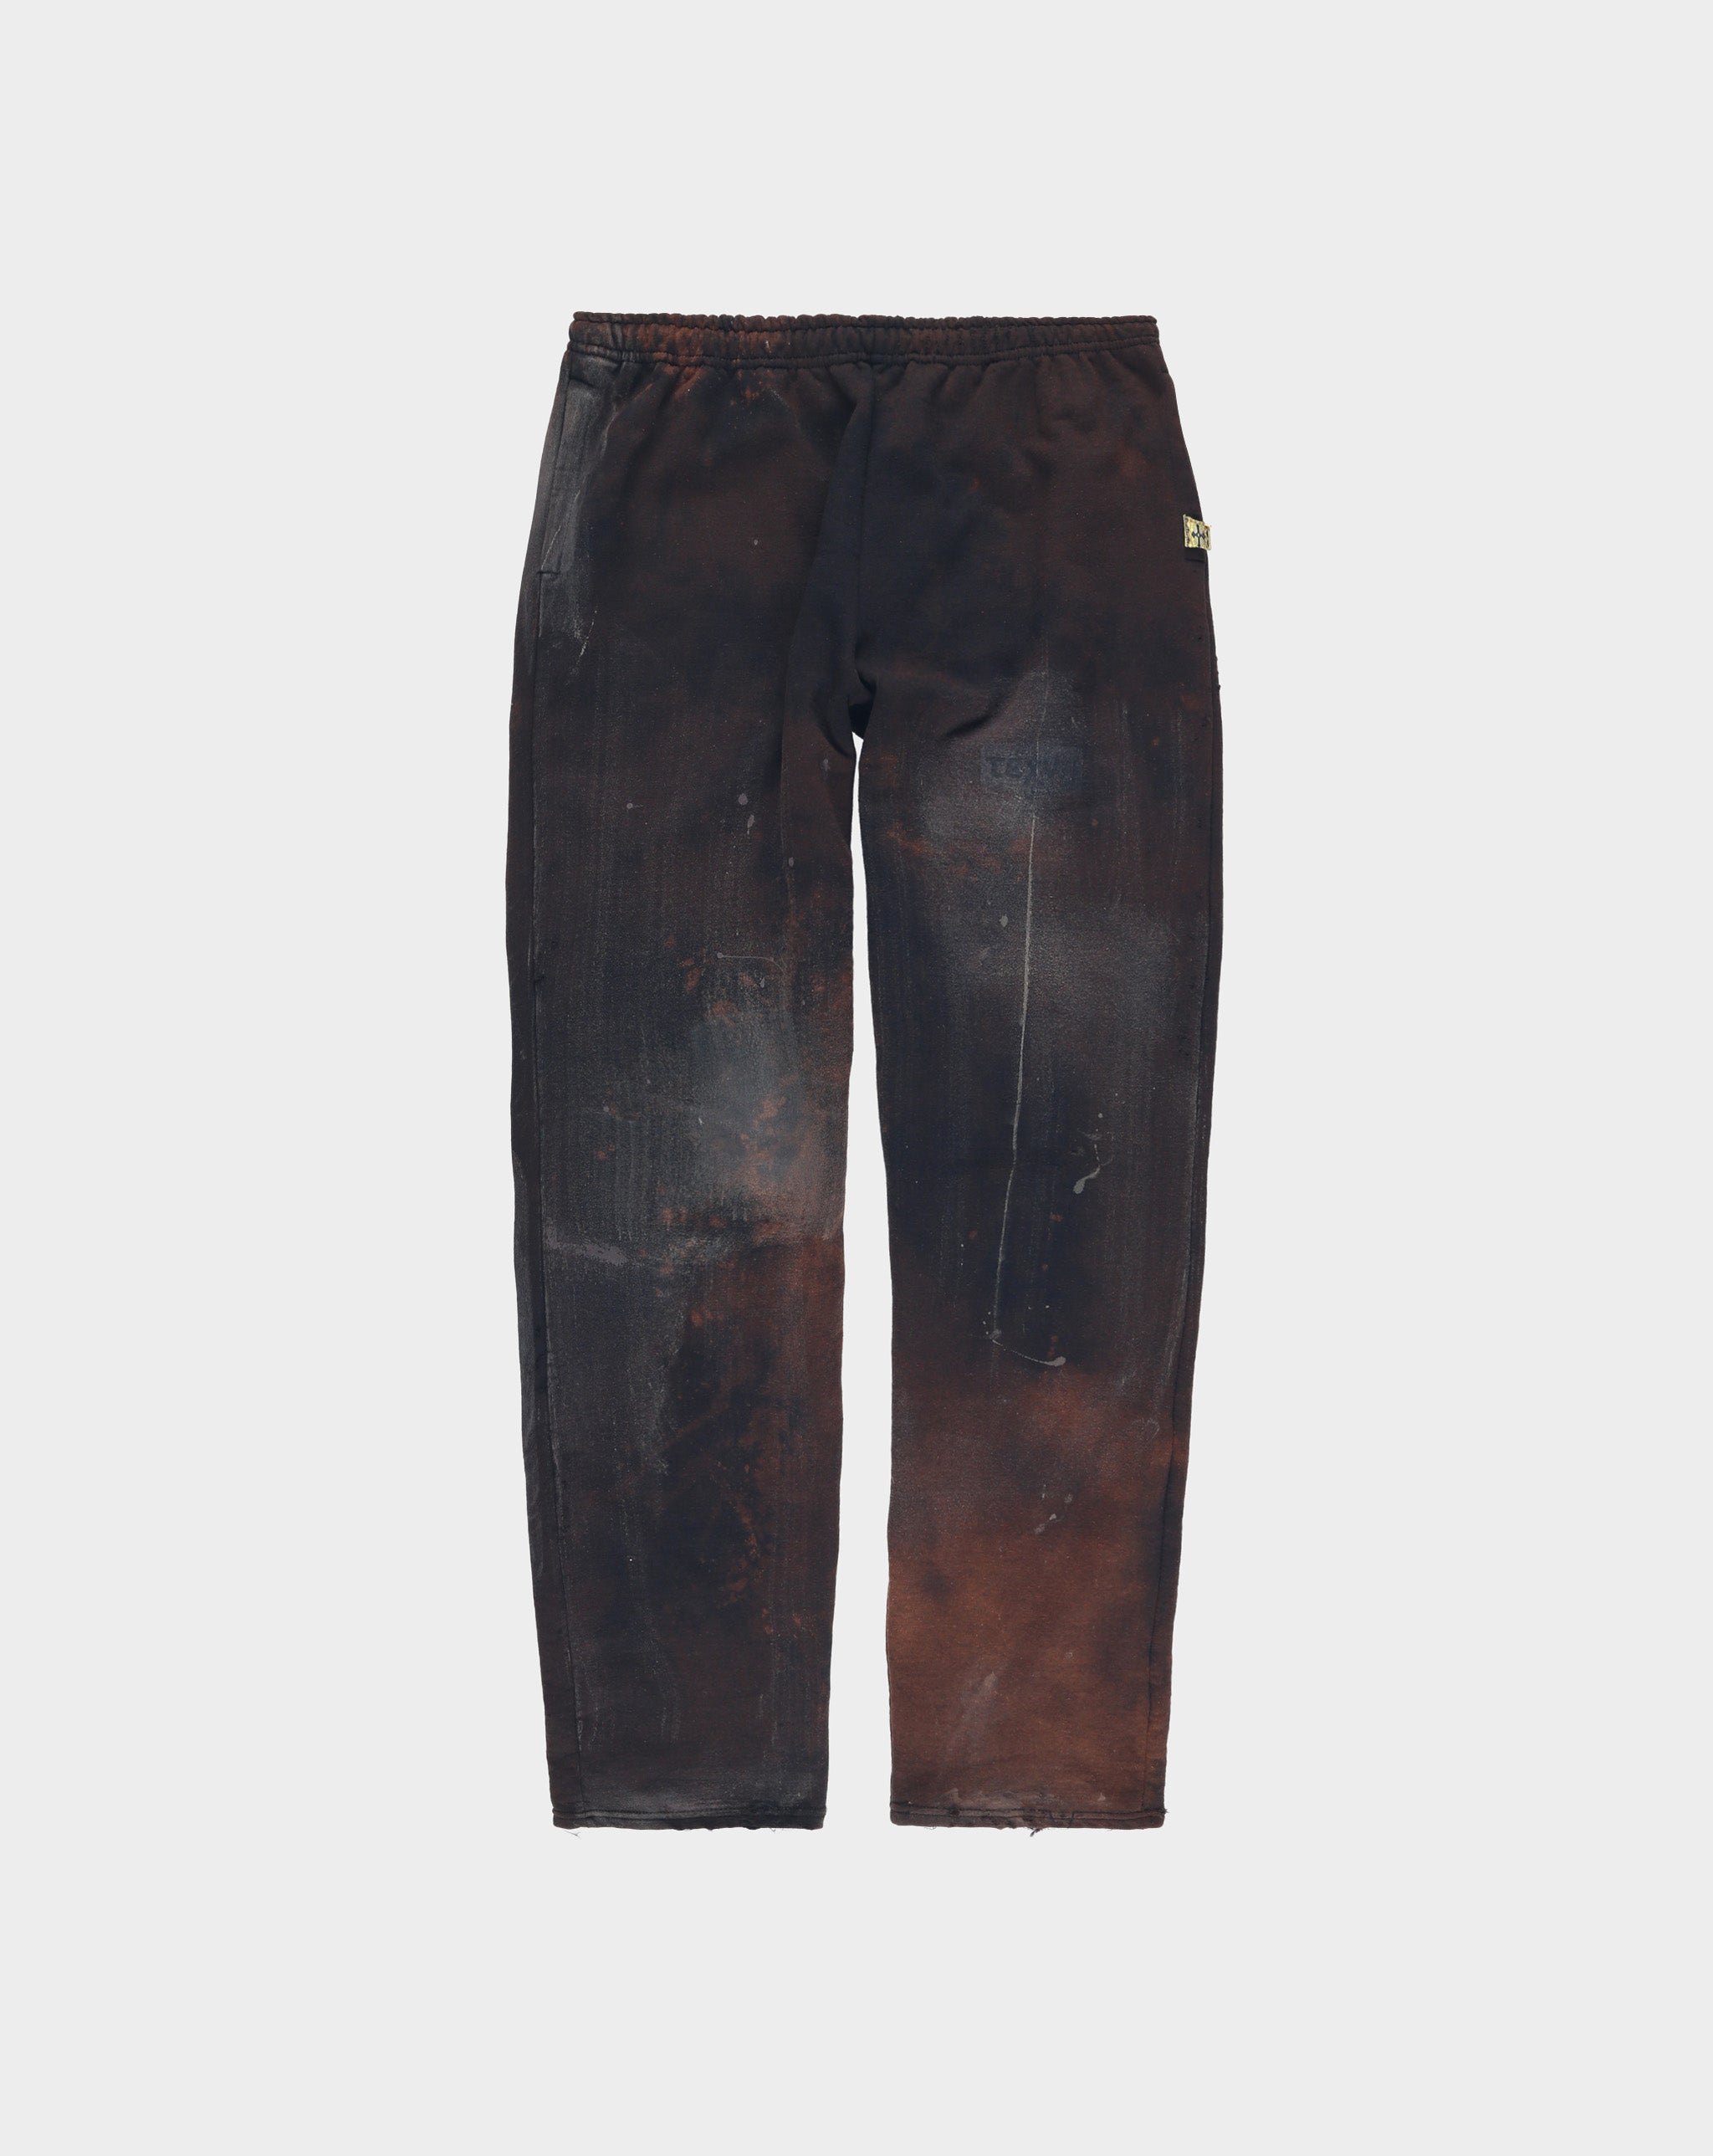 Contrast High CHxX Eroded Sweatpants 2  - XHIBITION